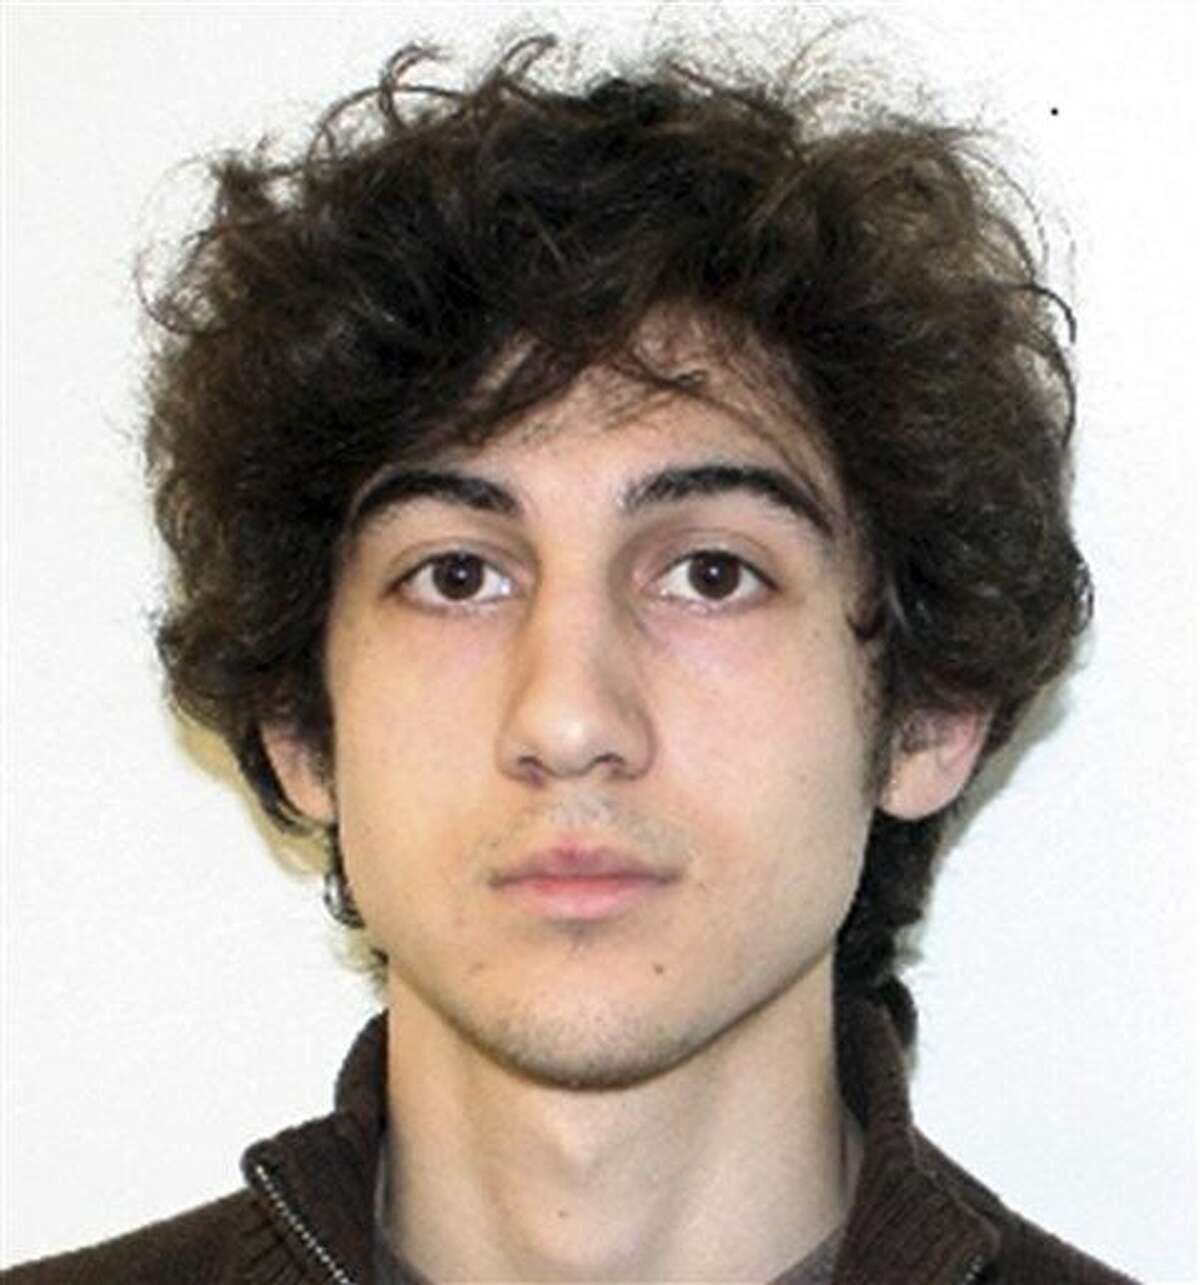 FILE - This undated file photo released Friday, April 19, 2013, by the FBI shows Dzhokhar Tsarnaev, convicted Wednesday, April 8, 2015, in federal court in Boston on multiple charges in the 2013 Boston Marathon bombings. Three people were killed and more than 260 were injured when twin pressure-cooker bombs exploded near the finish line. (AP Photo/FBI, File)